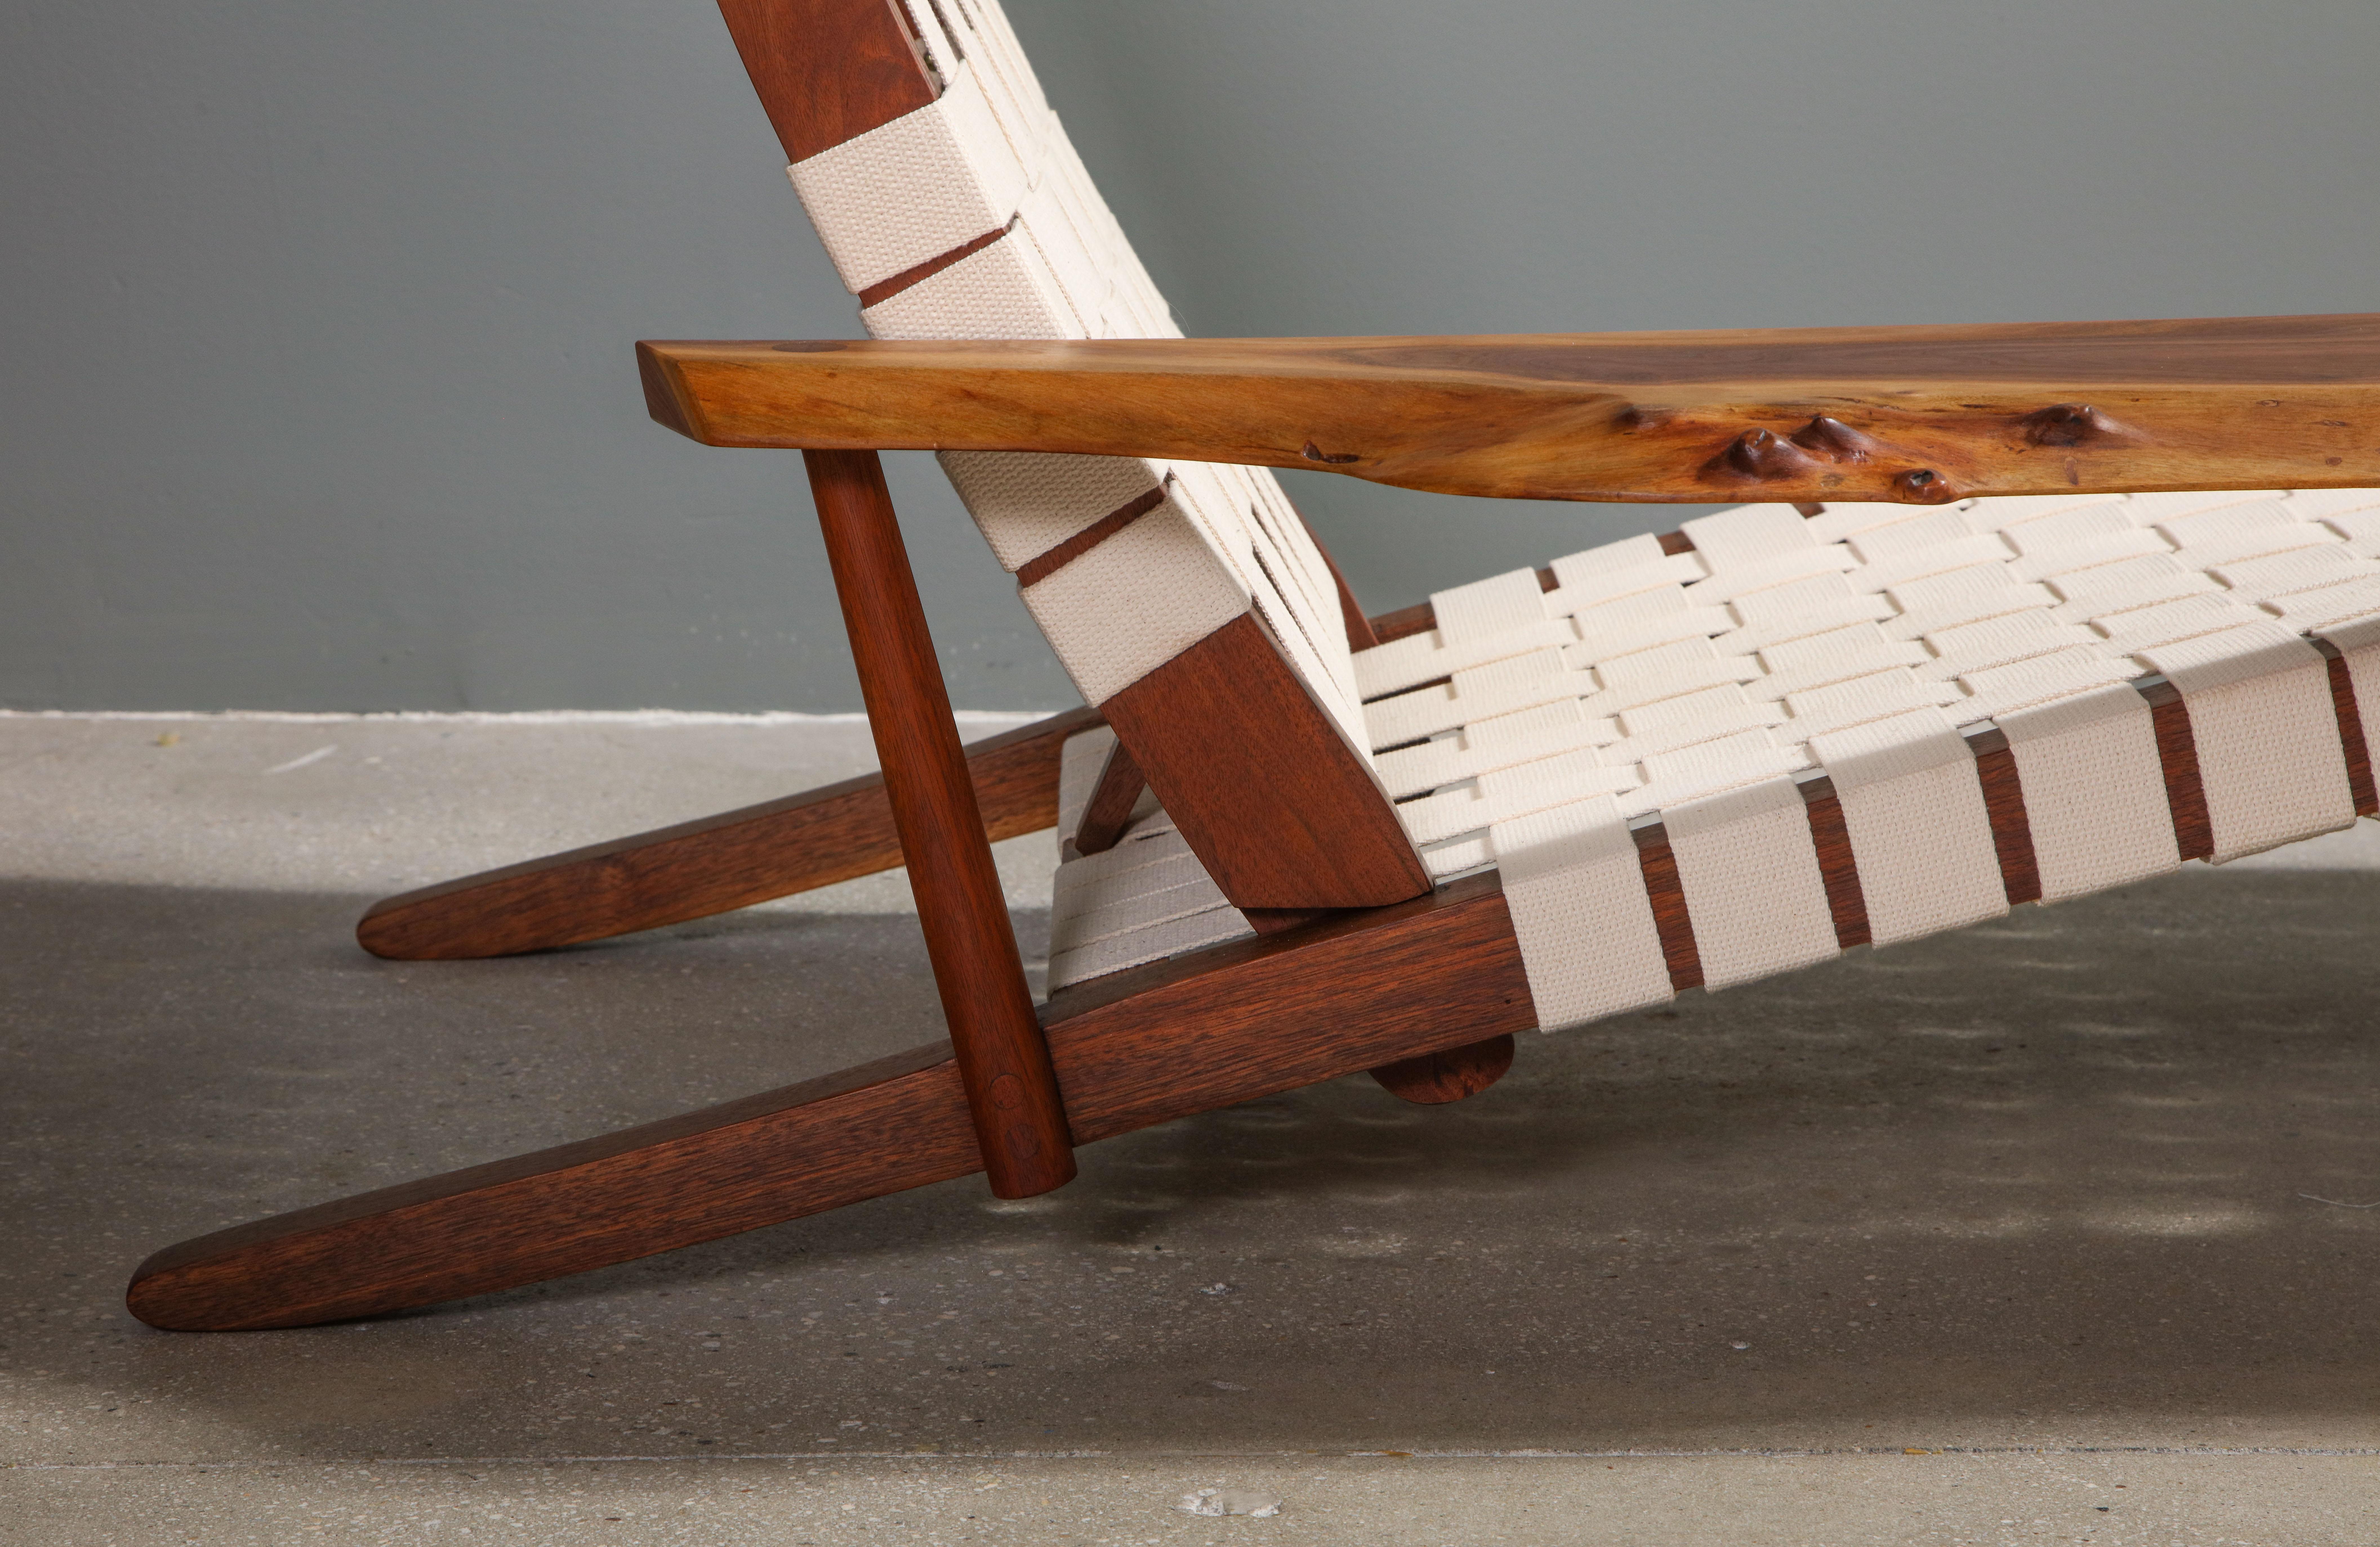 American Craftsman Long Chair with Single Free Form Arm, by George Nakashima, 1961